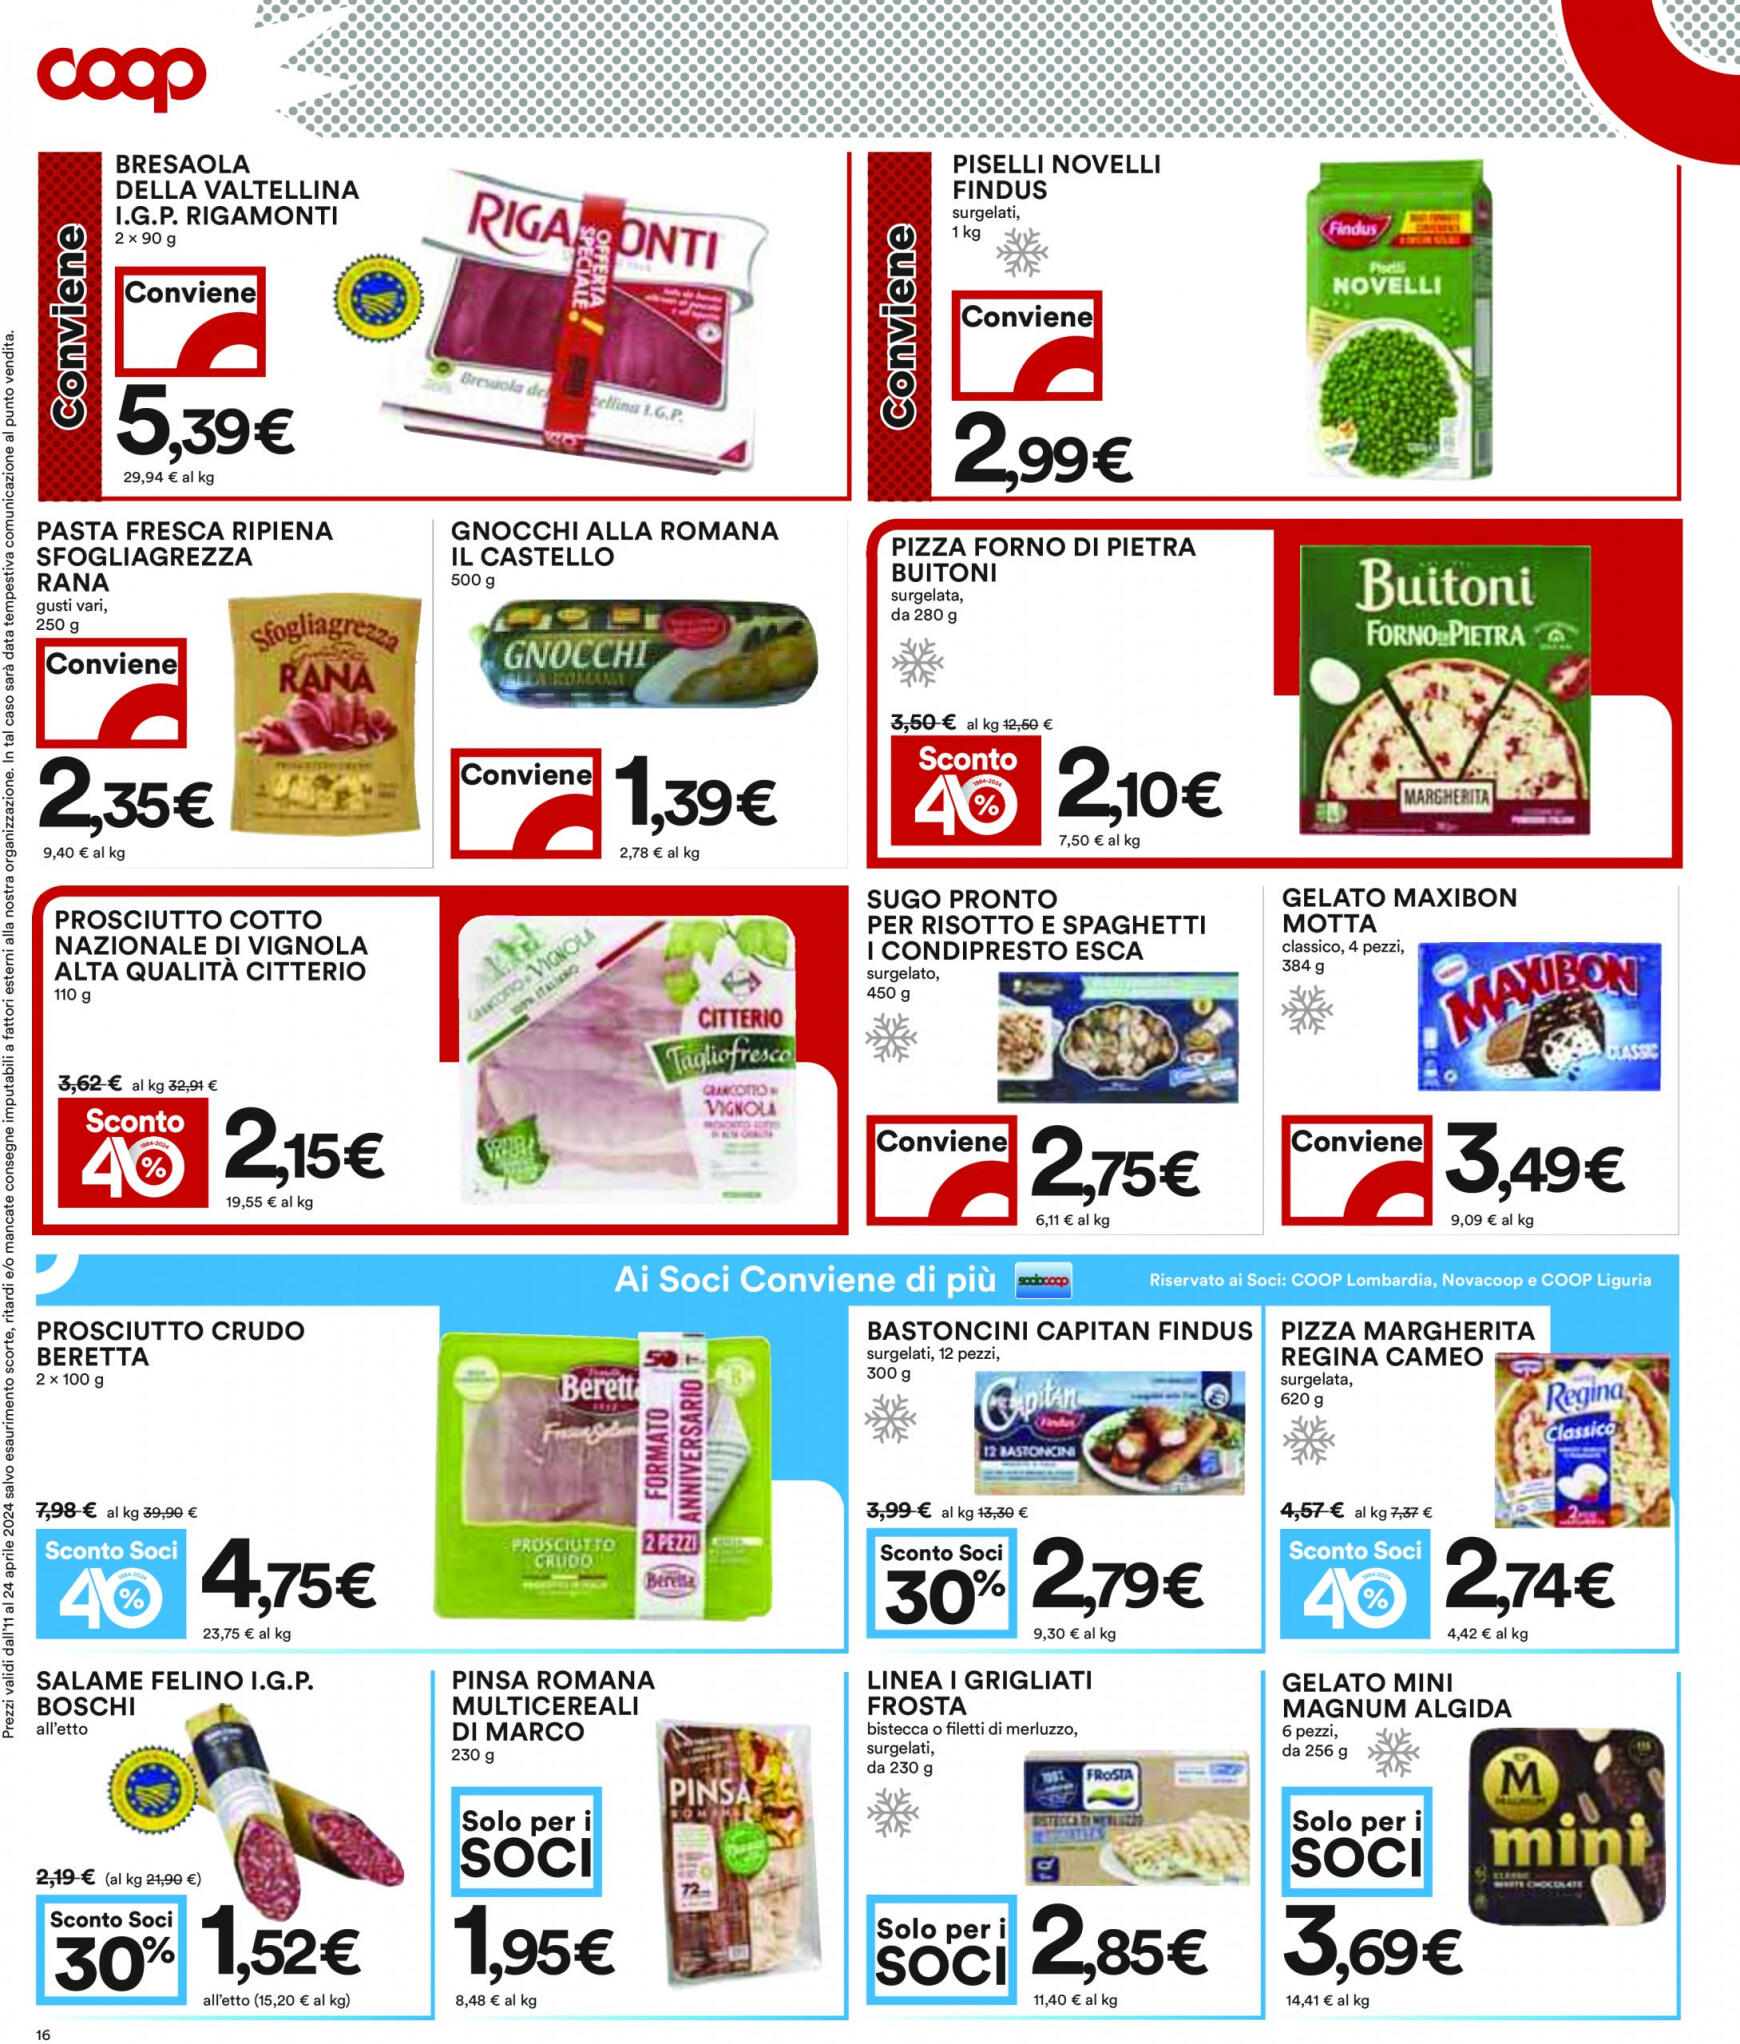 coop - Nuovo volantino Coop 11.04. - 24.04. - page: 16